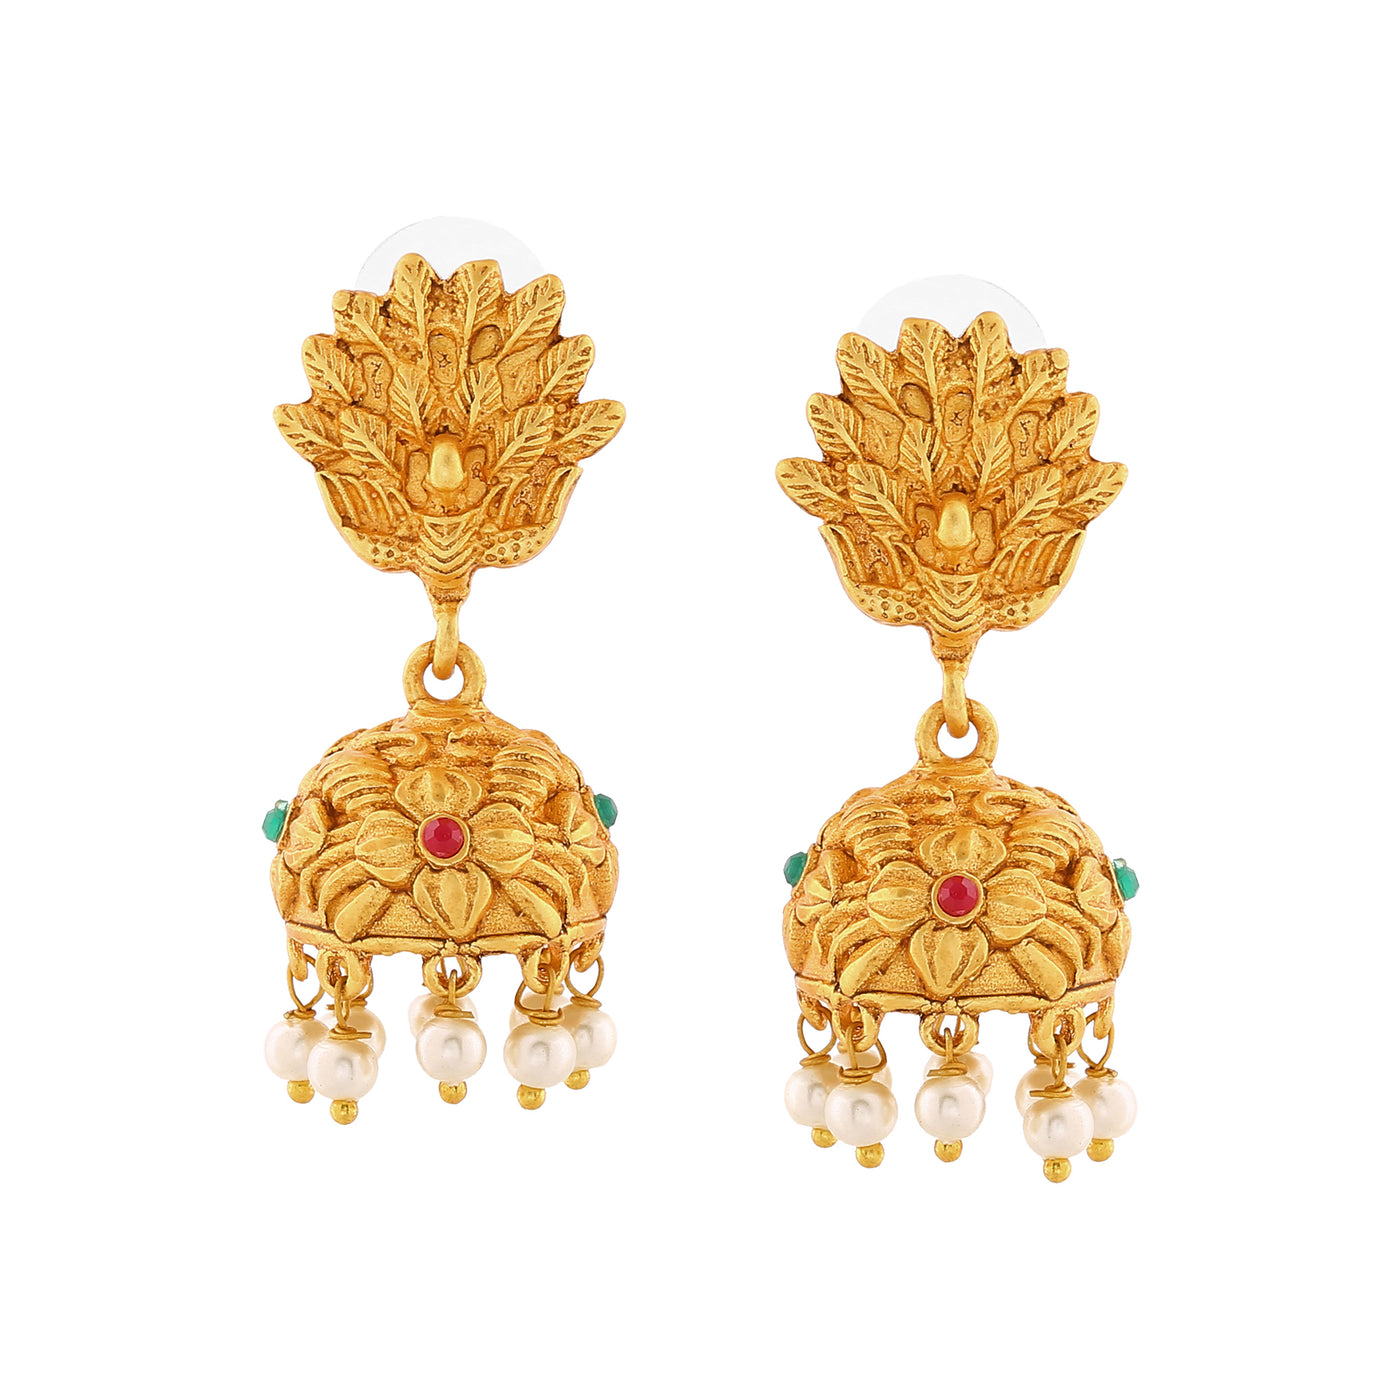 Estele gold Plated Elegant Peacock Designer Jhumki Earrings with Crystals & Pearls for Women